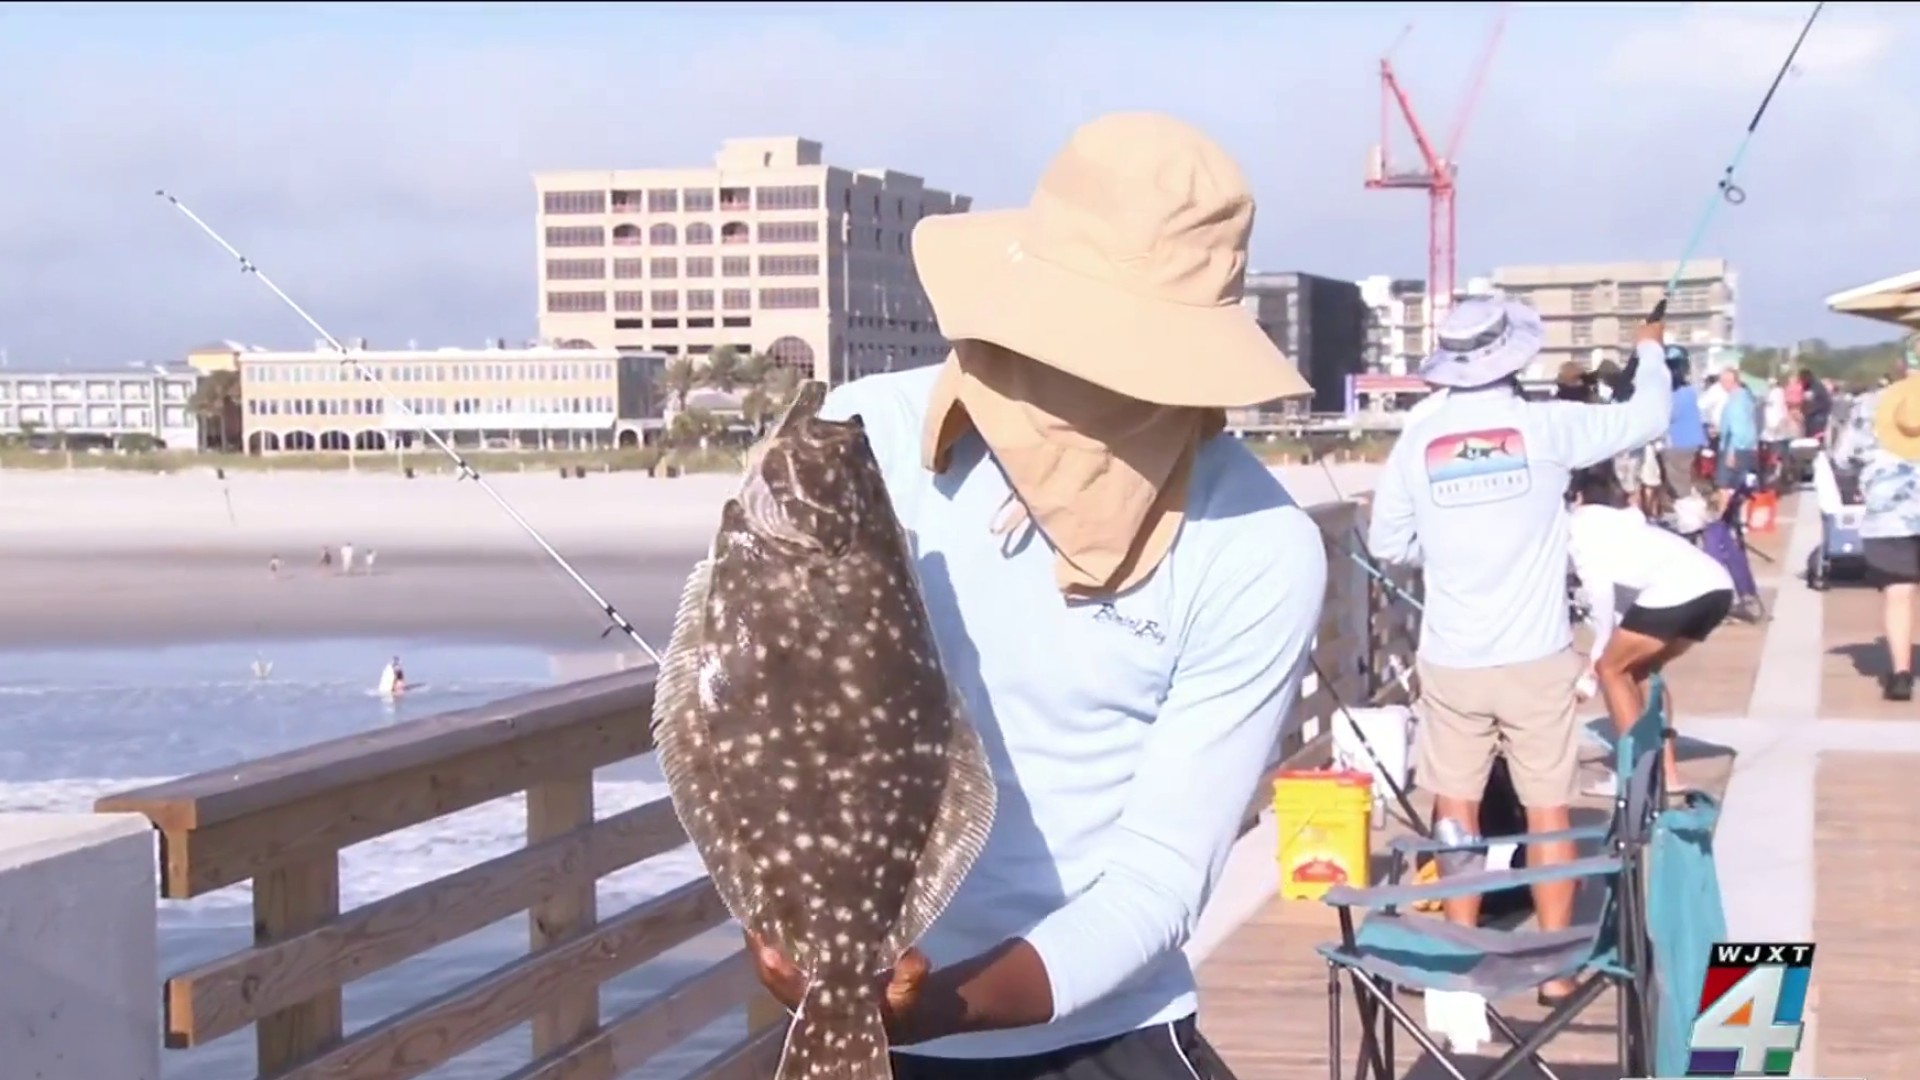 Anglers rejoice! Fishing returns to newly reopened Jacksonville